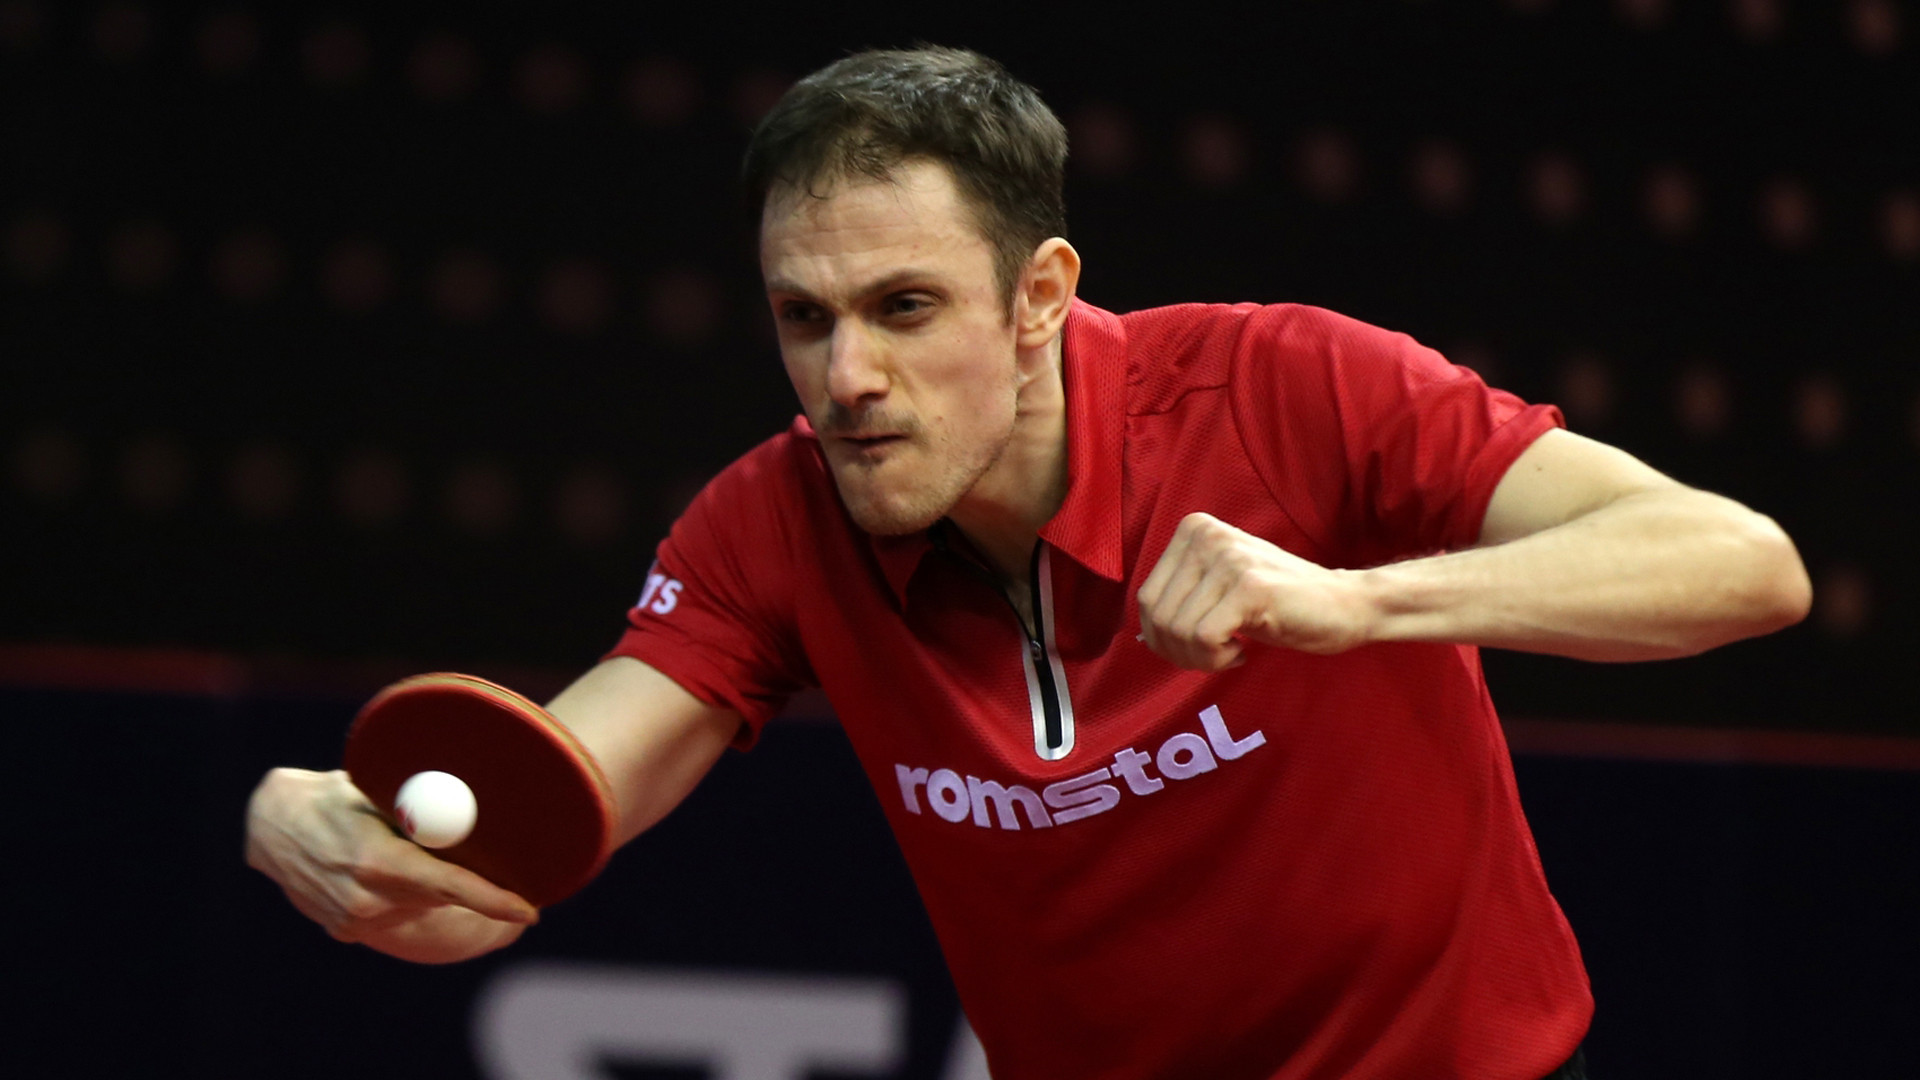 Romania’s Ovidiu Ionescu suffered a shock defeat on the opening day of the ITTF's European Olympic Singles Qualification Tournament in Portugal ©ITTF